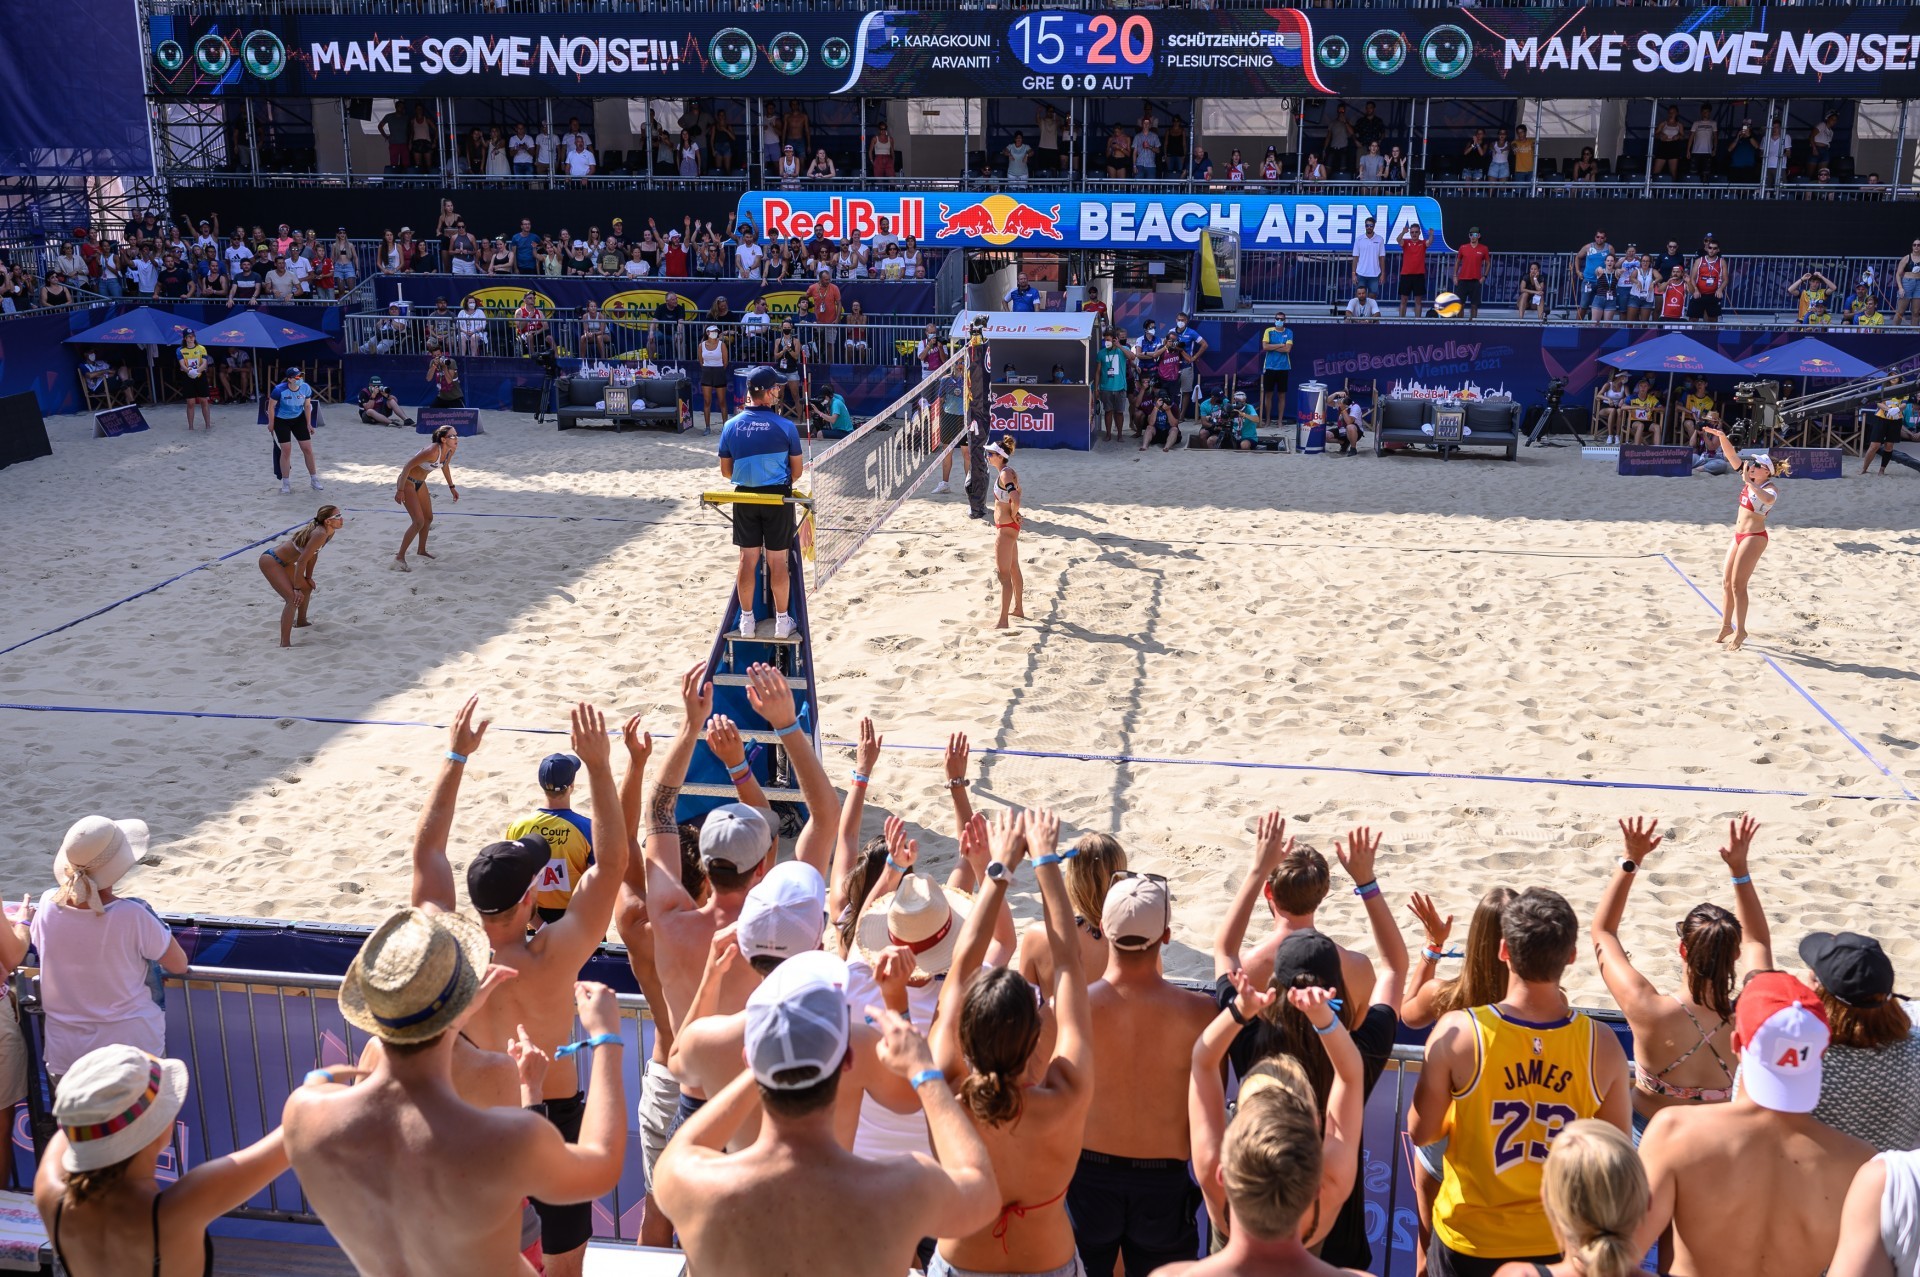 The Austrians played in front of their home fans at the Red Bull Beach Arena